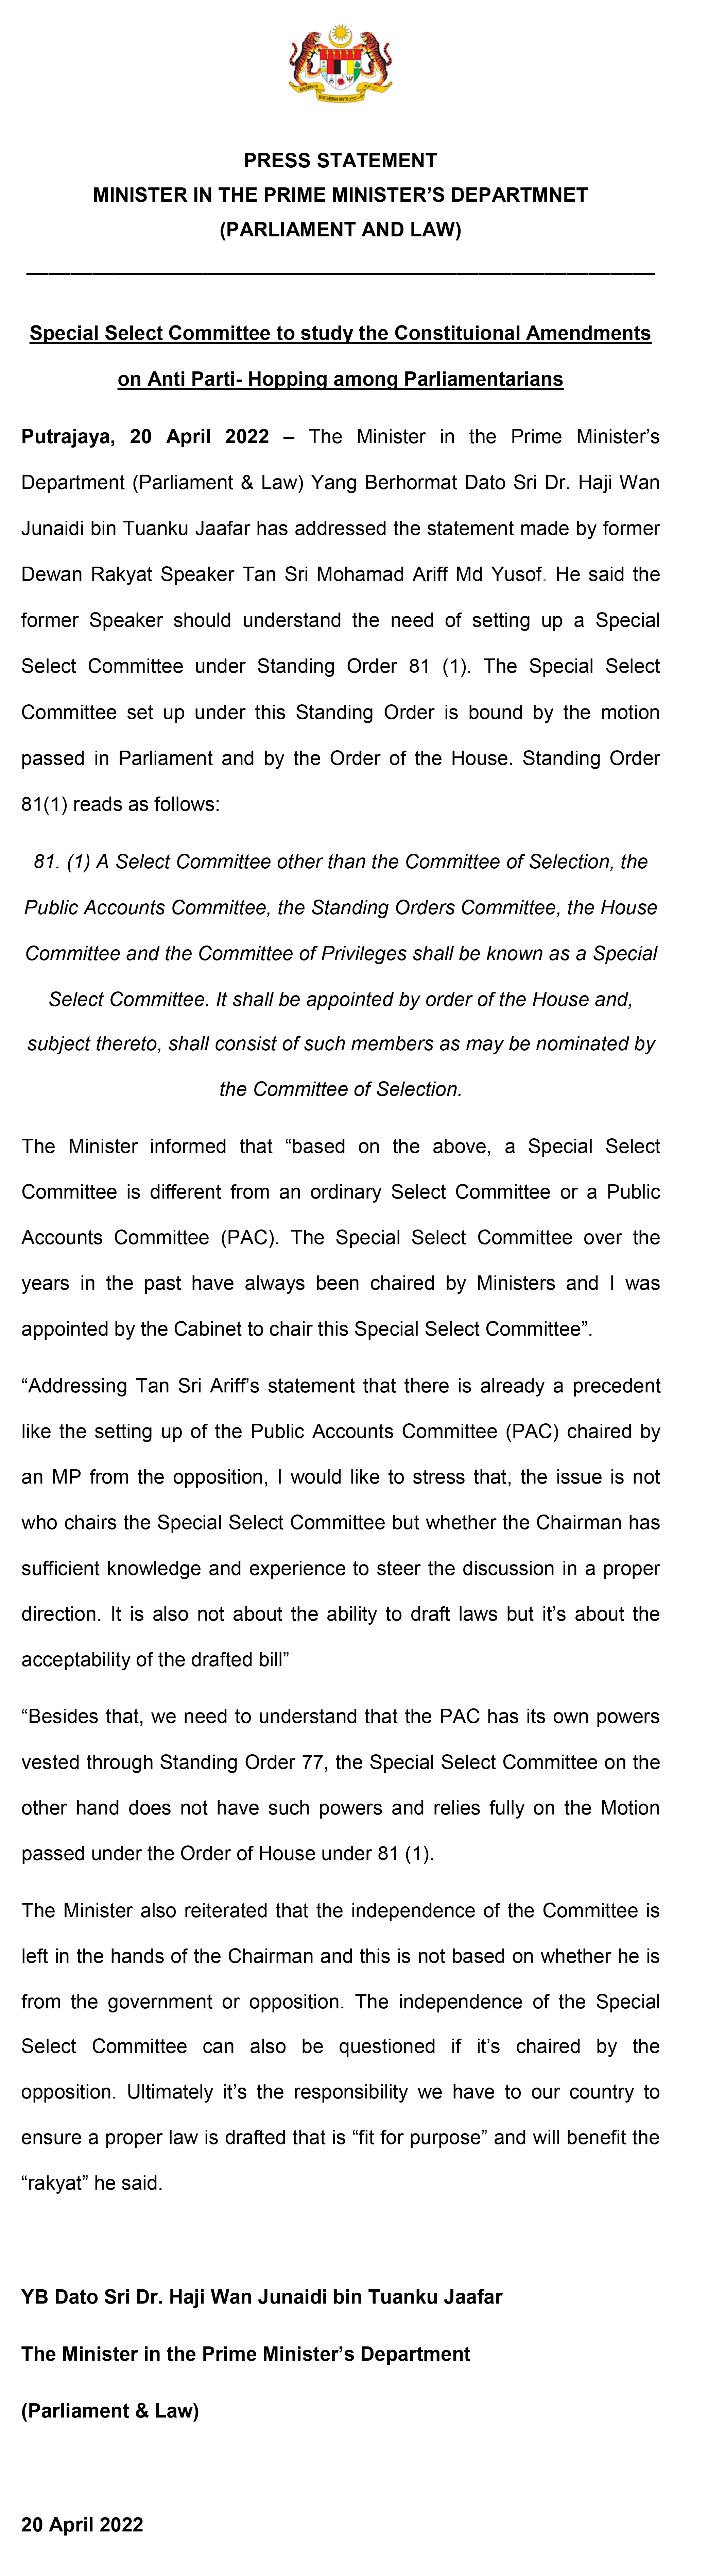 20 April   Response To The Statement Raised By Tan Sri Ariff 1